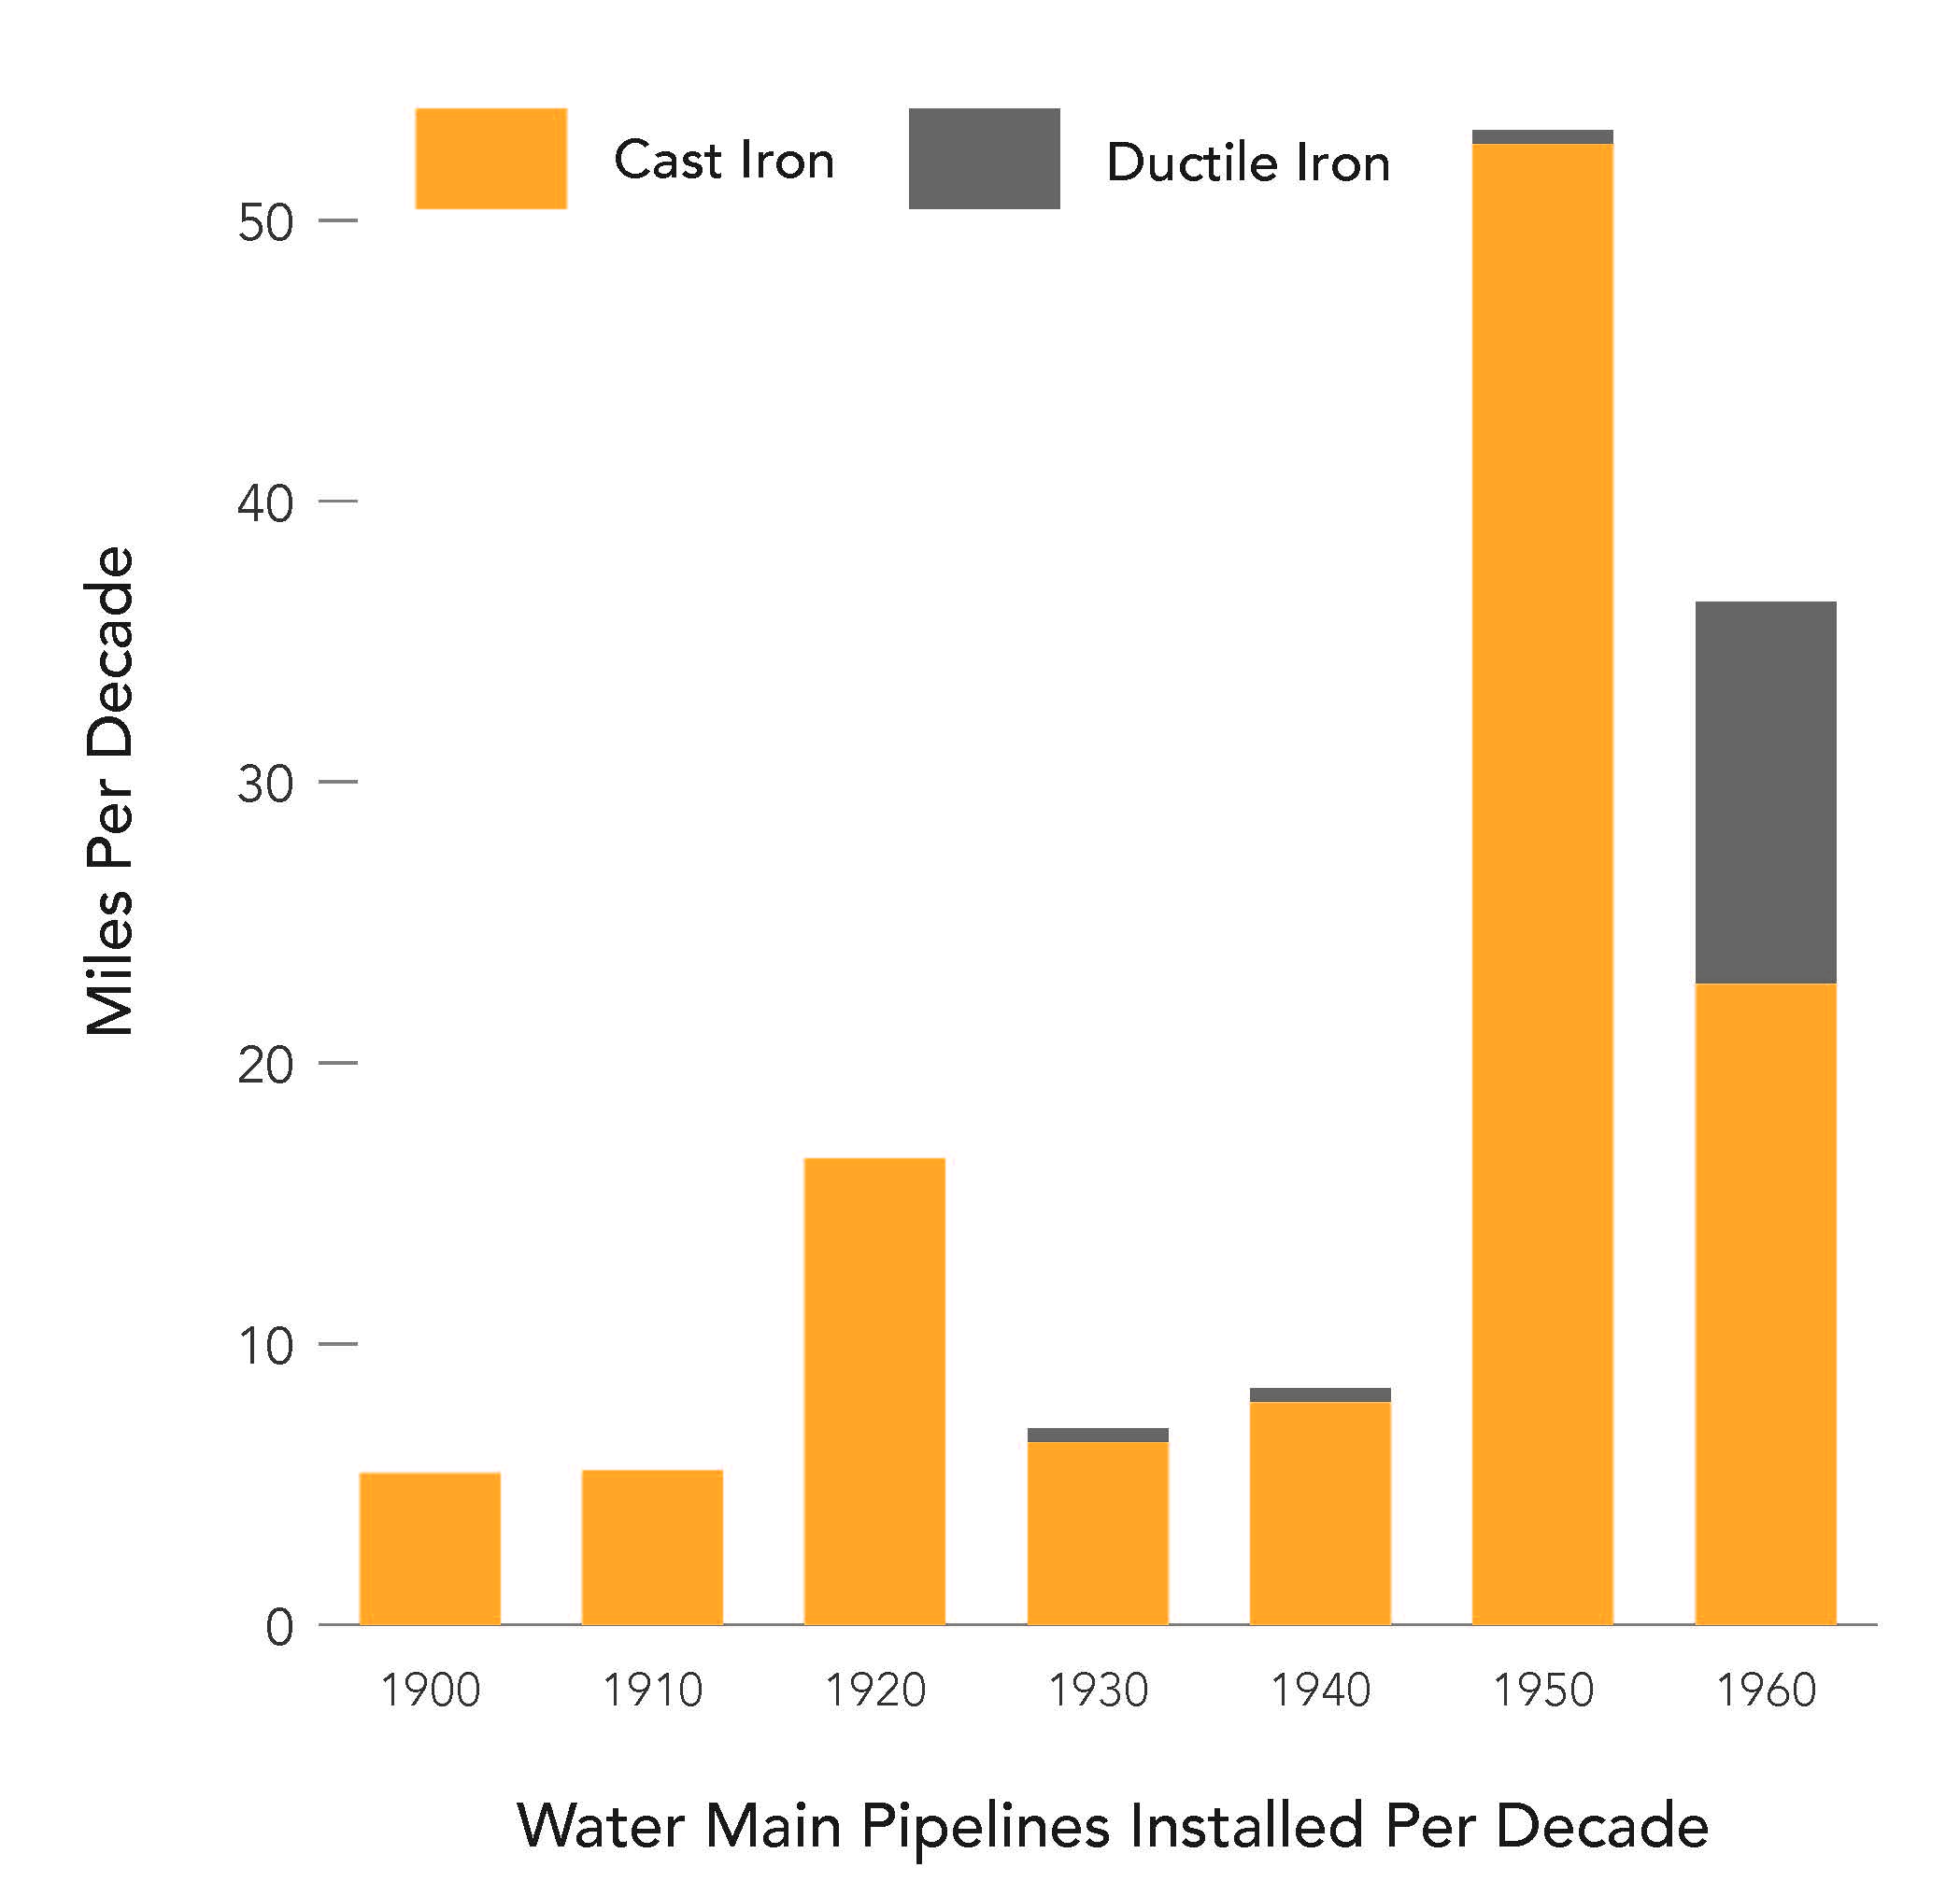 Water Main Pipelines Installed Per Decade